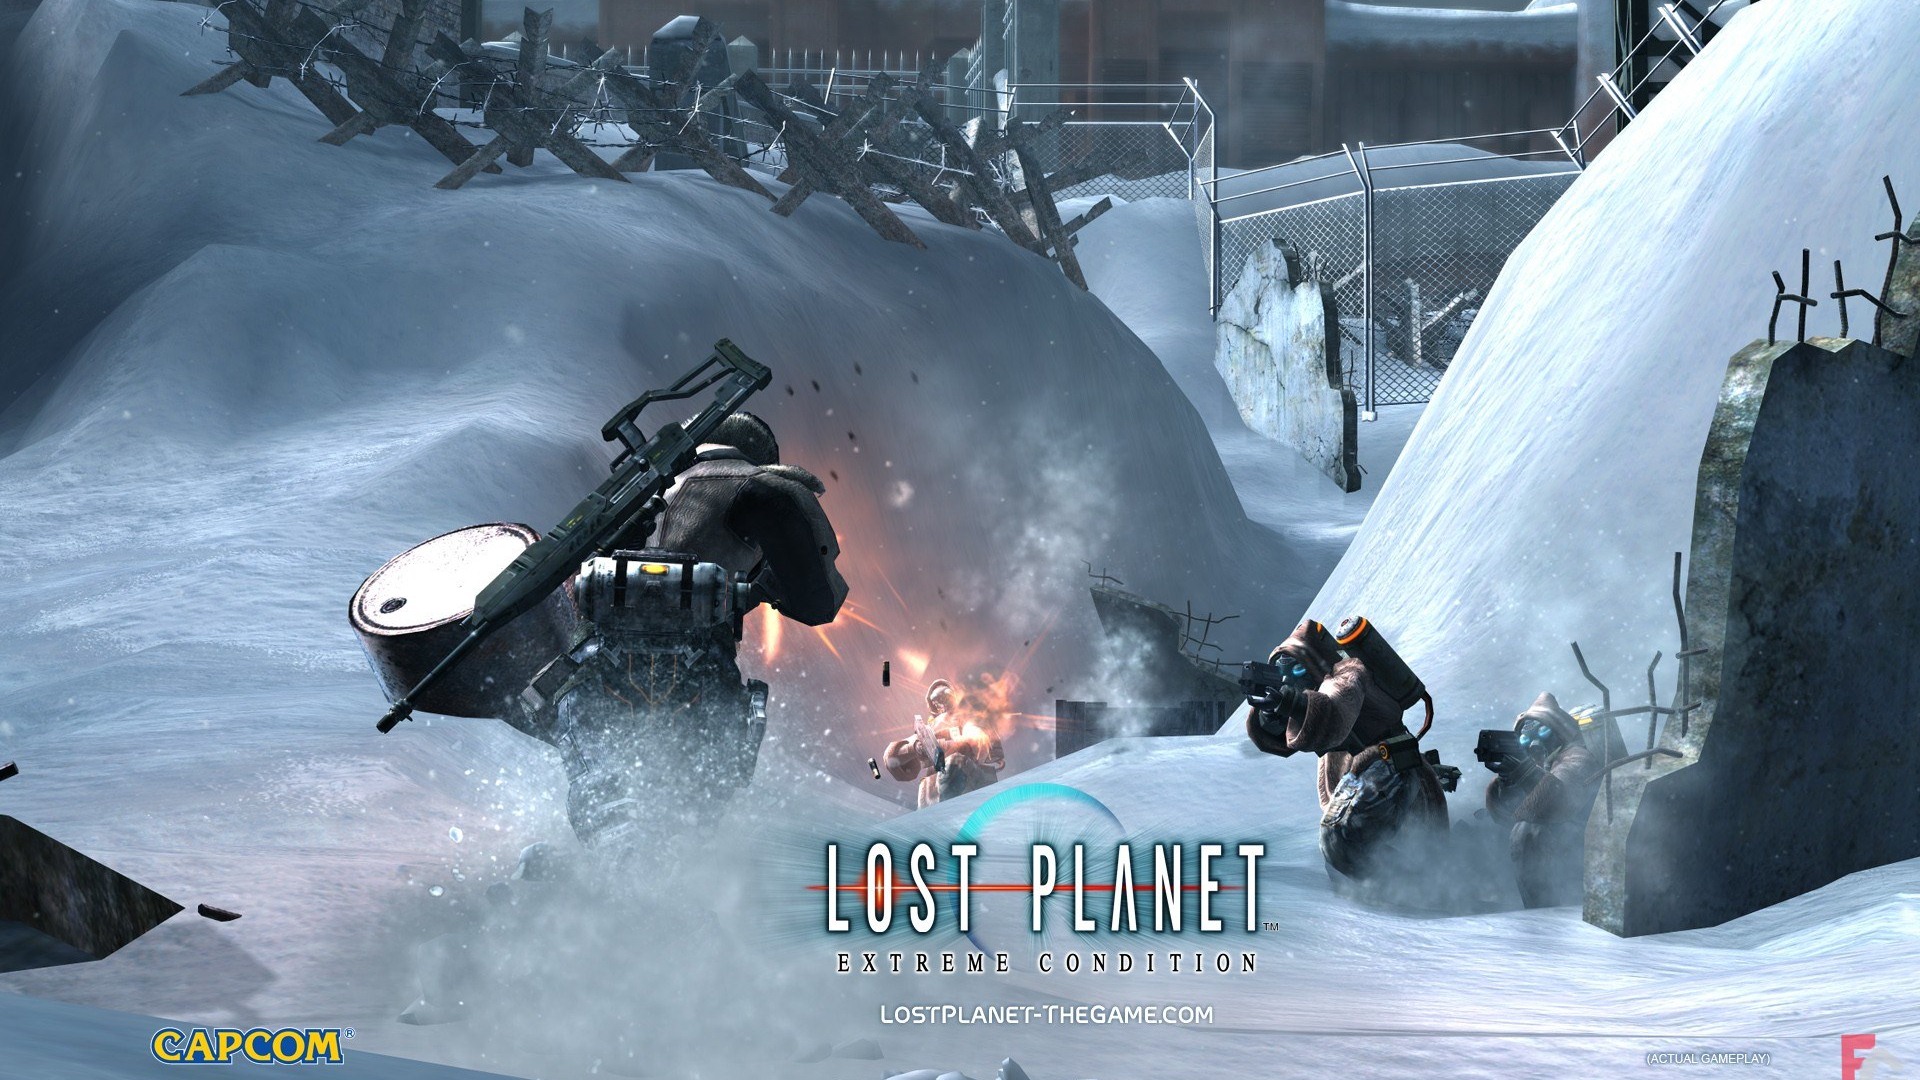 Lost Planet: Extreme Condition HD tapety na plochu #20 - 1920x1080